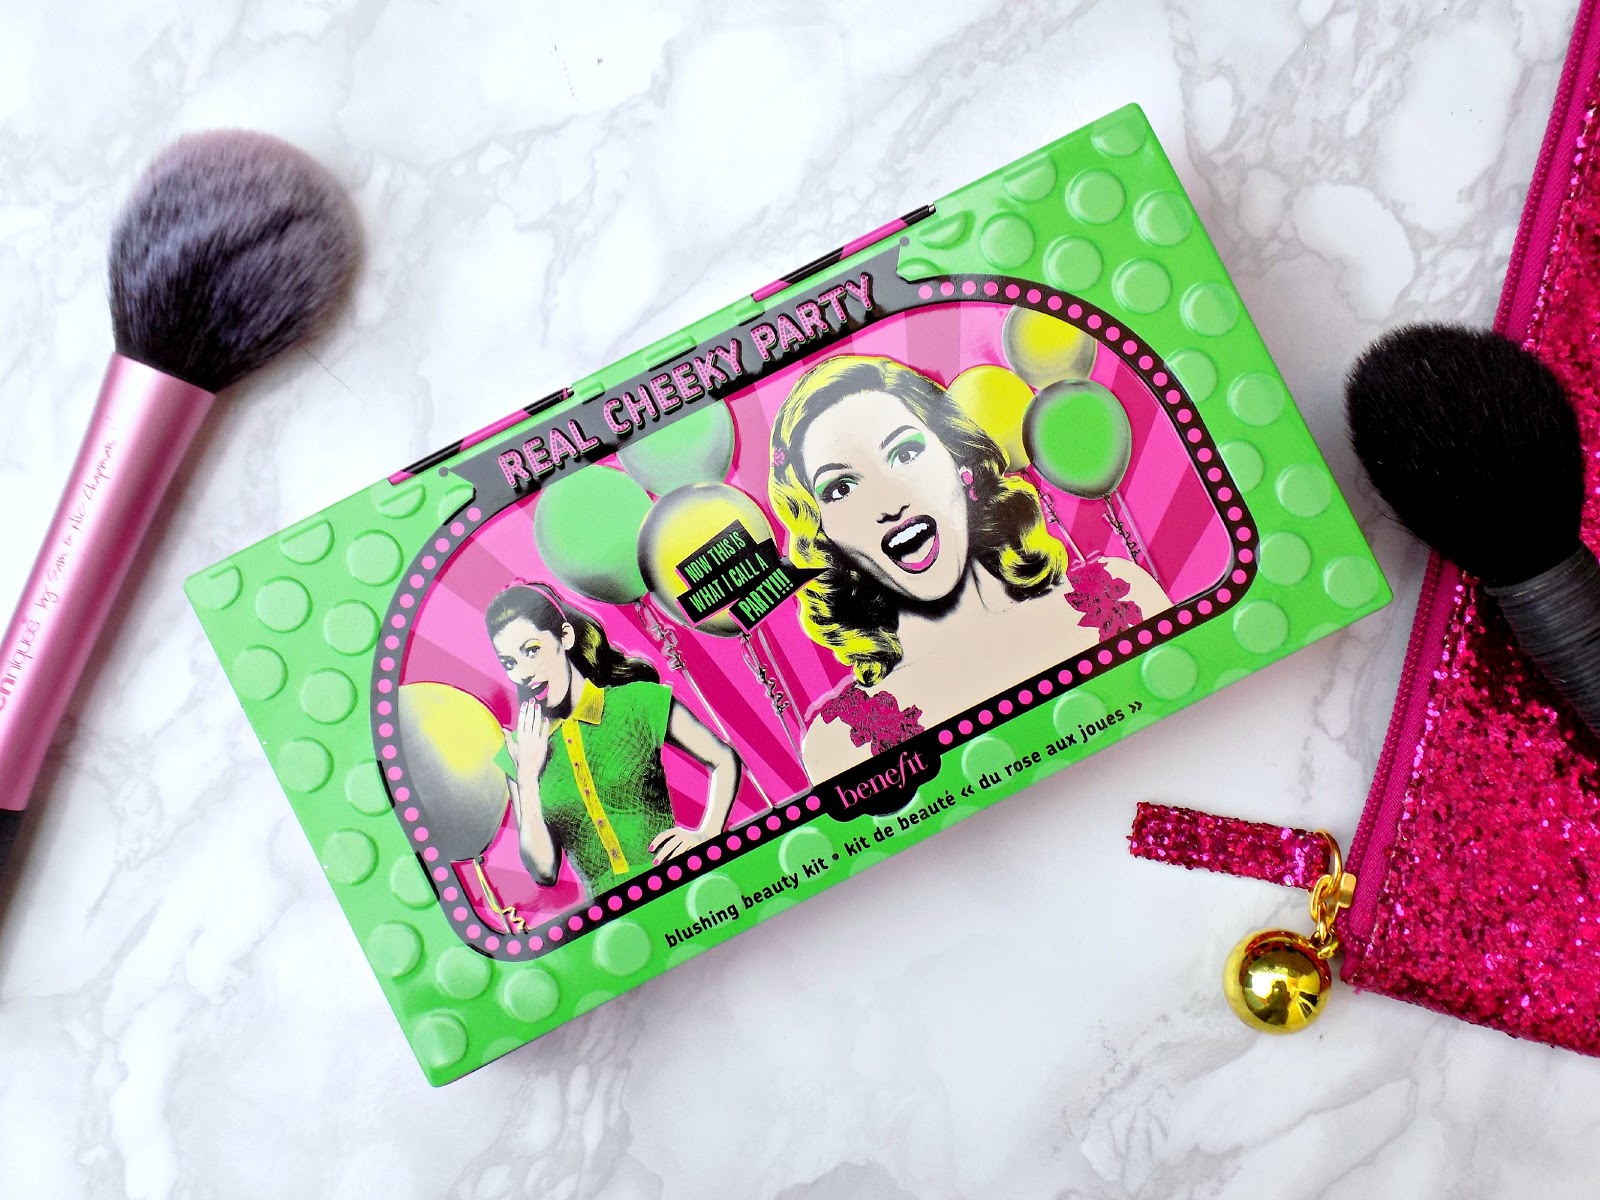 Benefit 'Real Cheeky Party' Holiday set